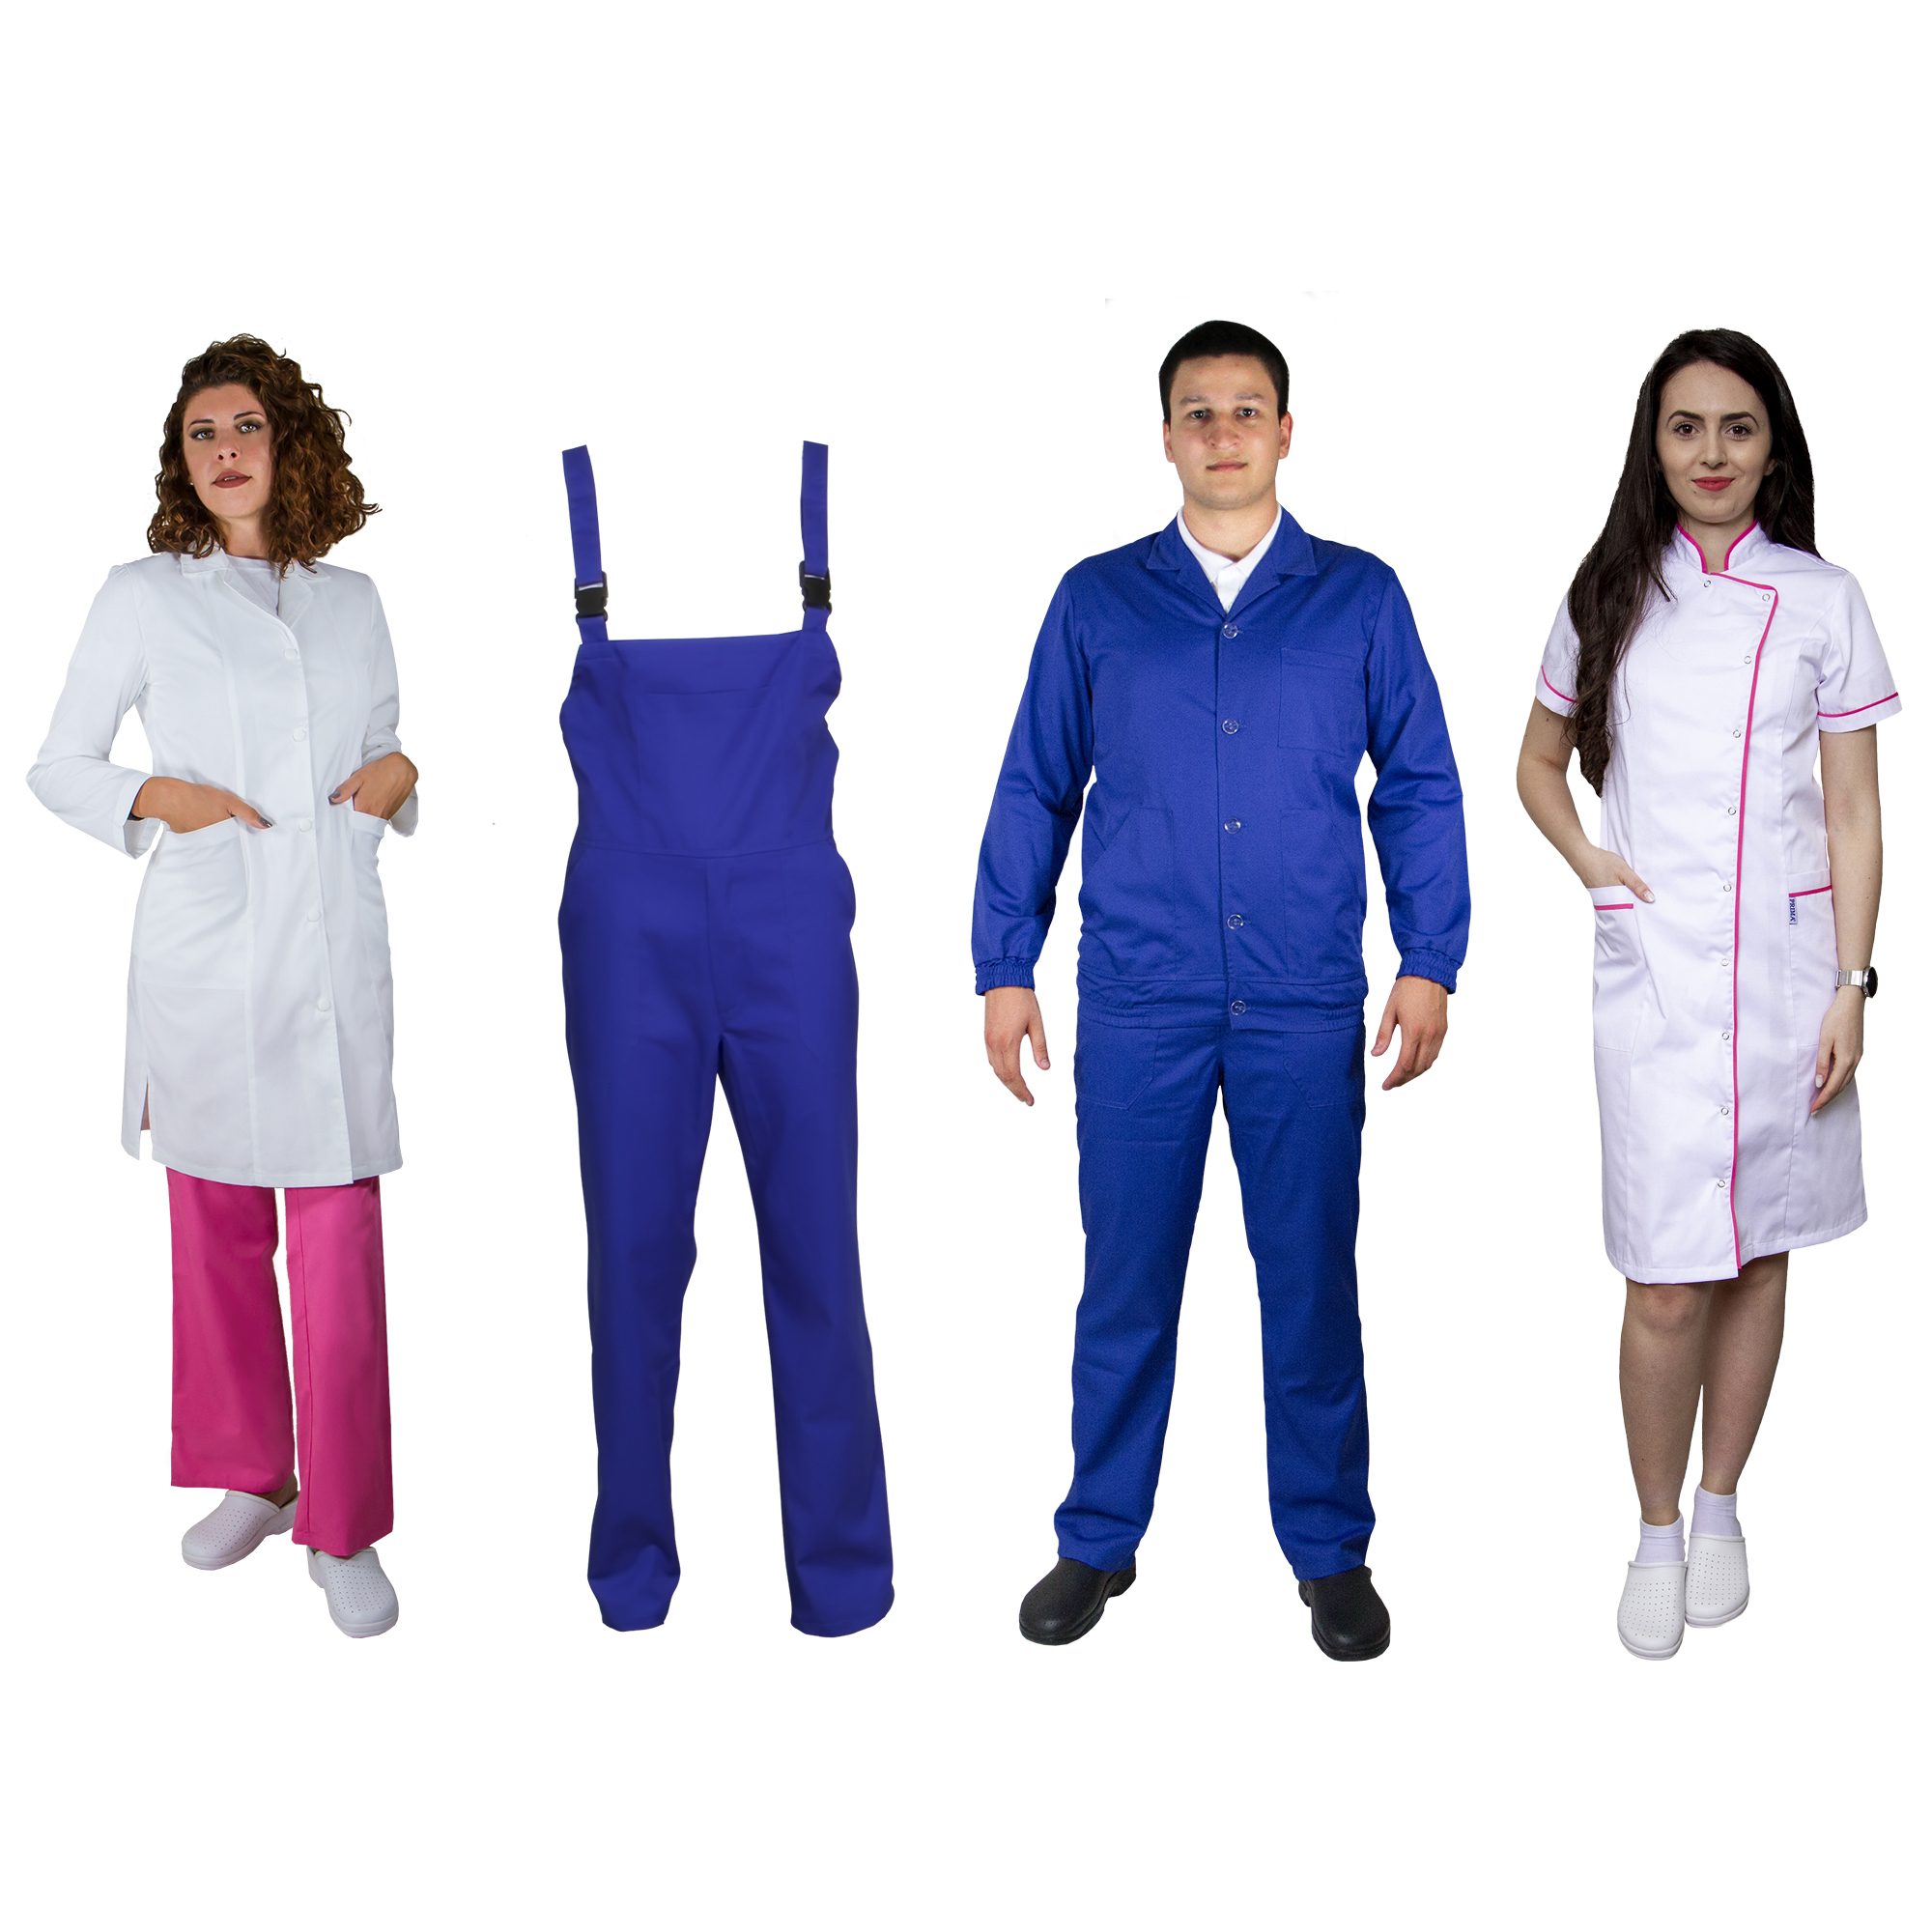 Work Uniforms/PROFESSIONAL UNIFORMS/Robes and Work Wear